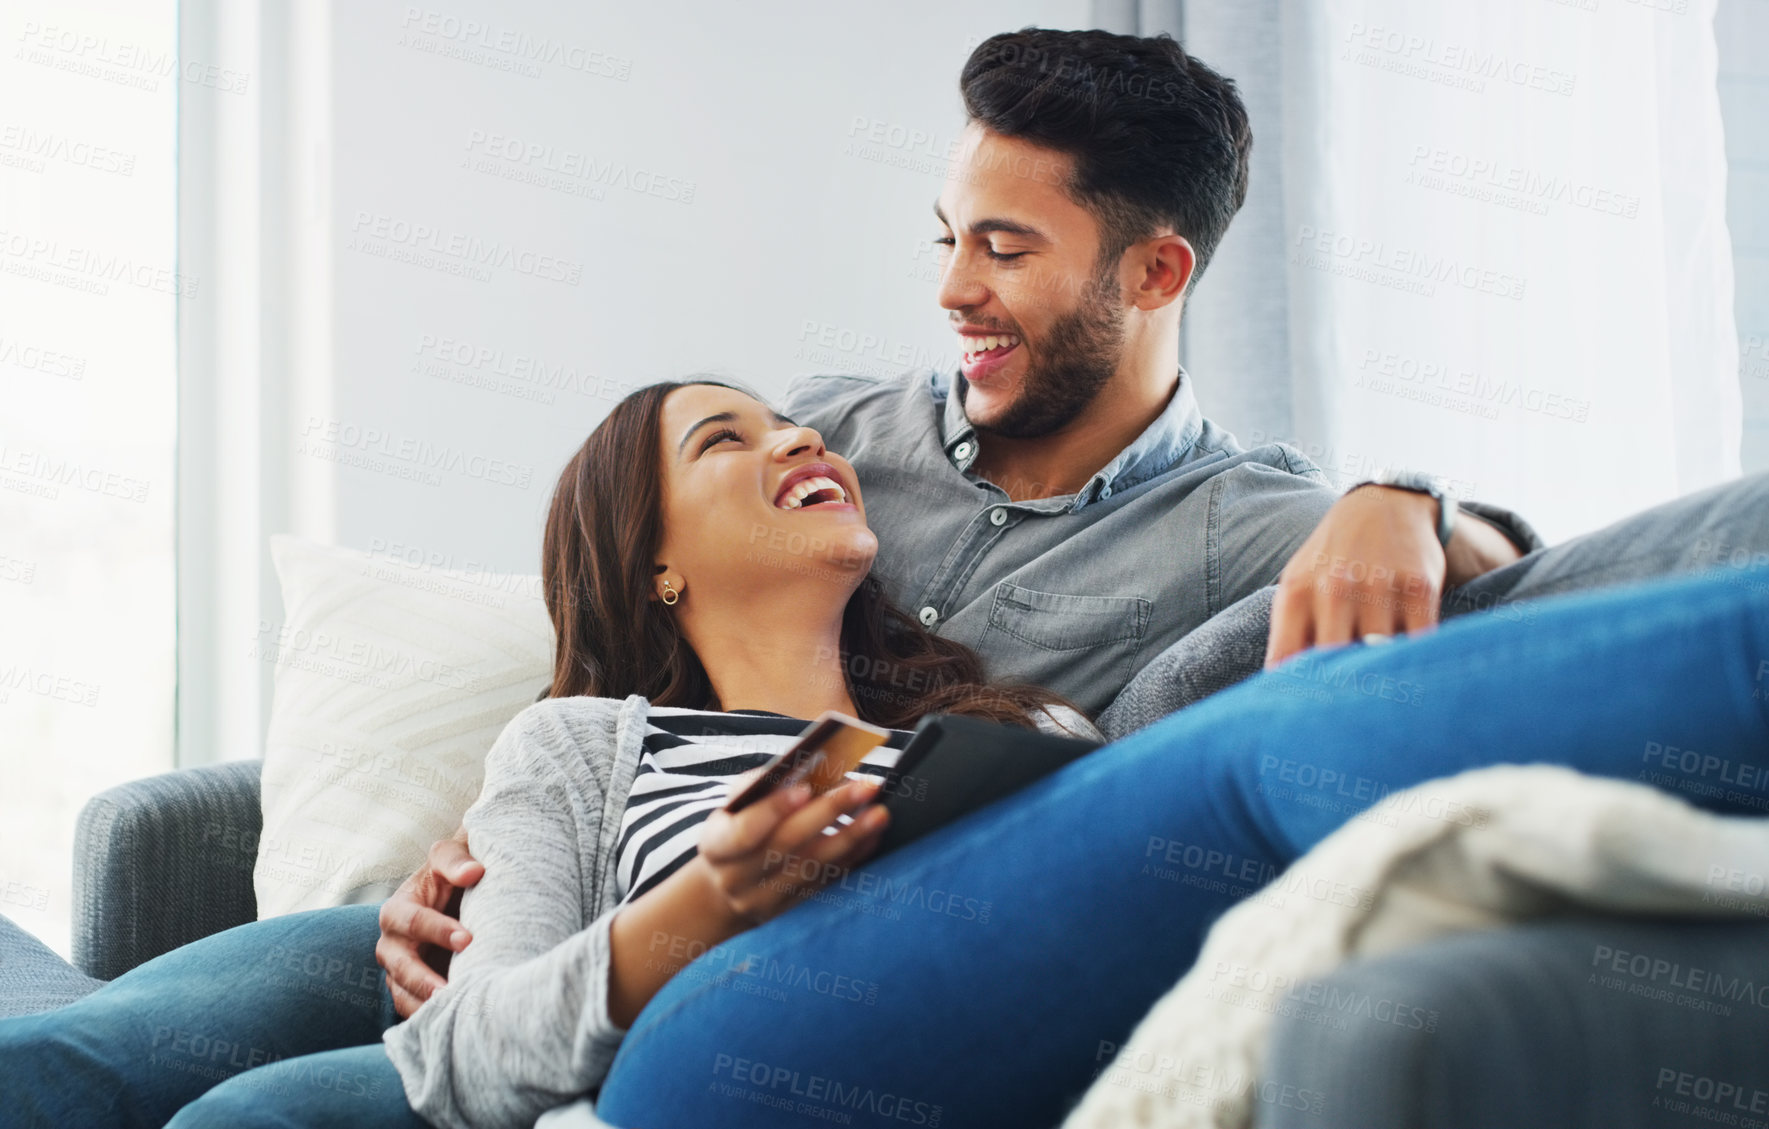 Buy stock photo Cropped shot of an affectionate young couple lounging on the sofa while using a tablet in their living room